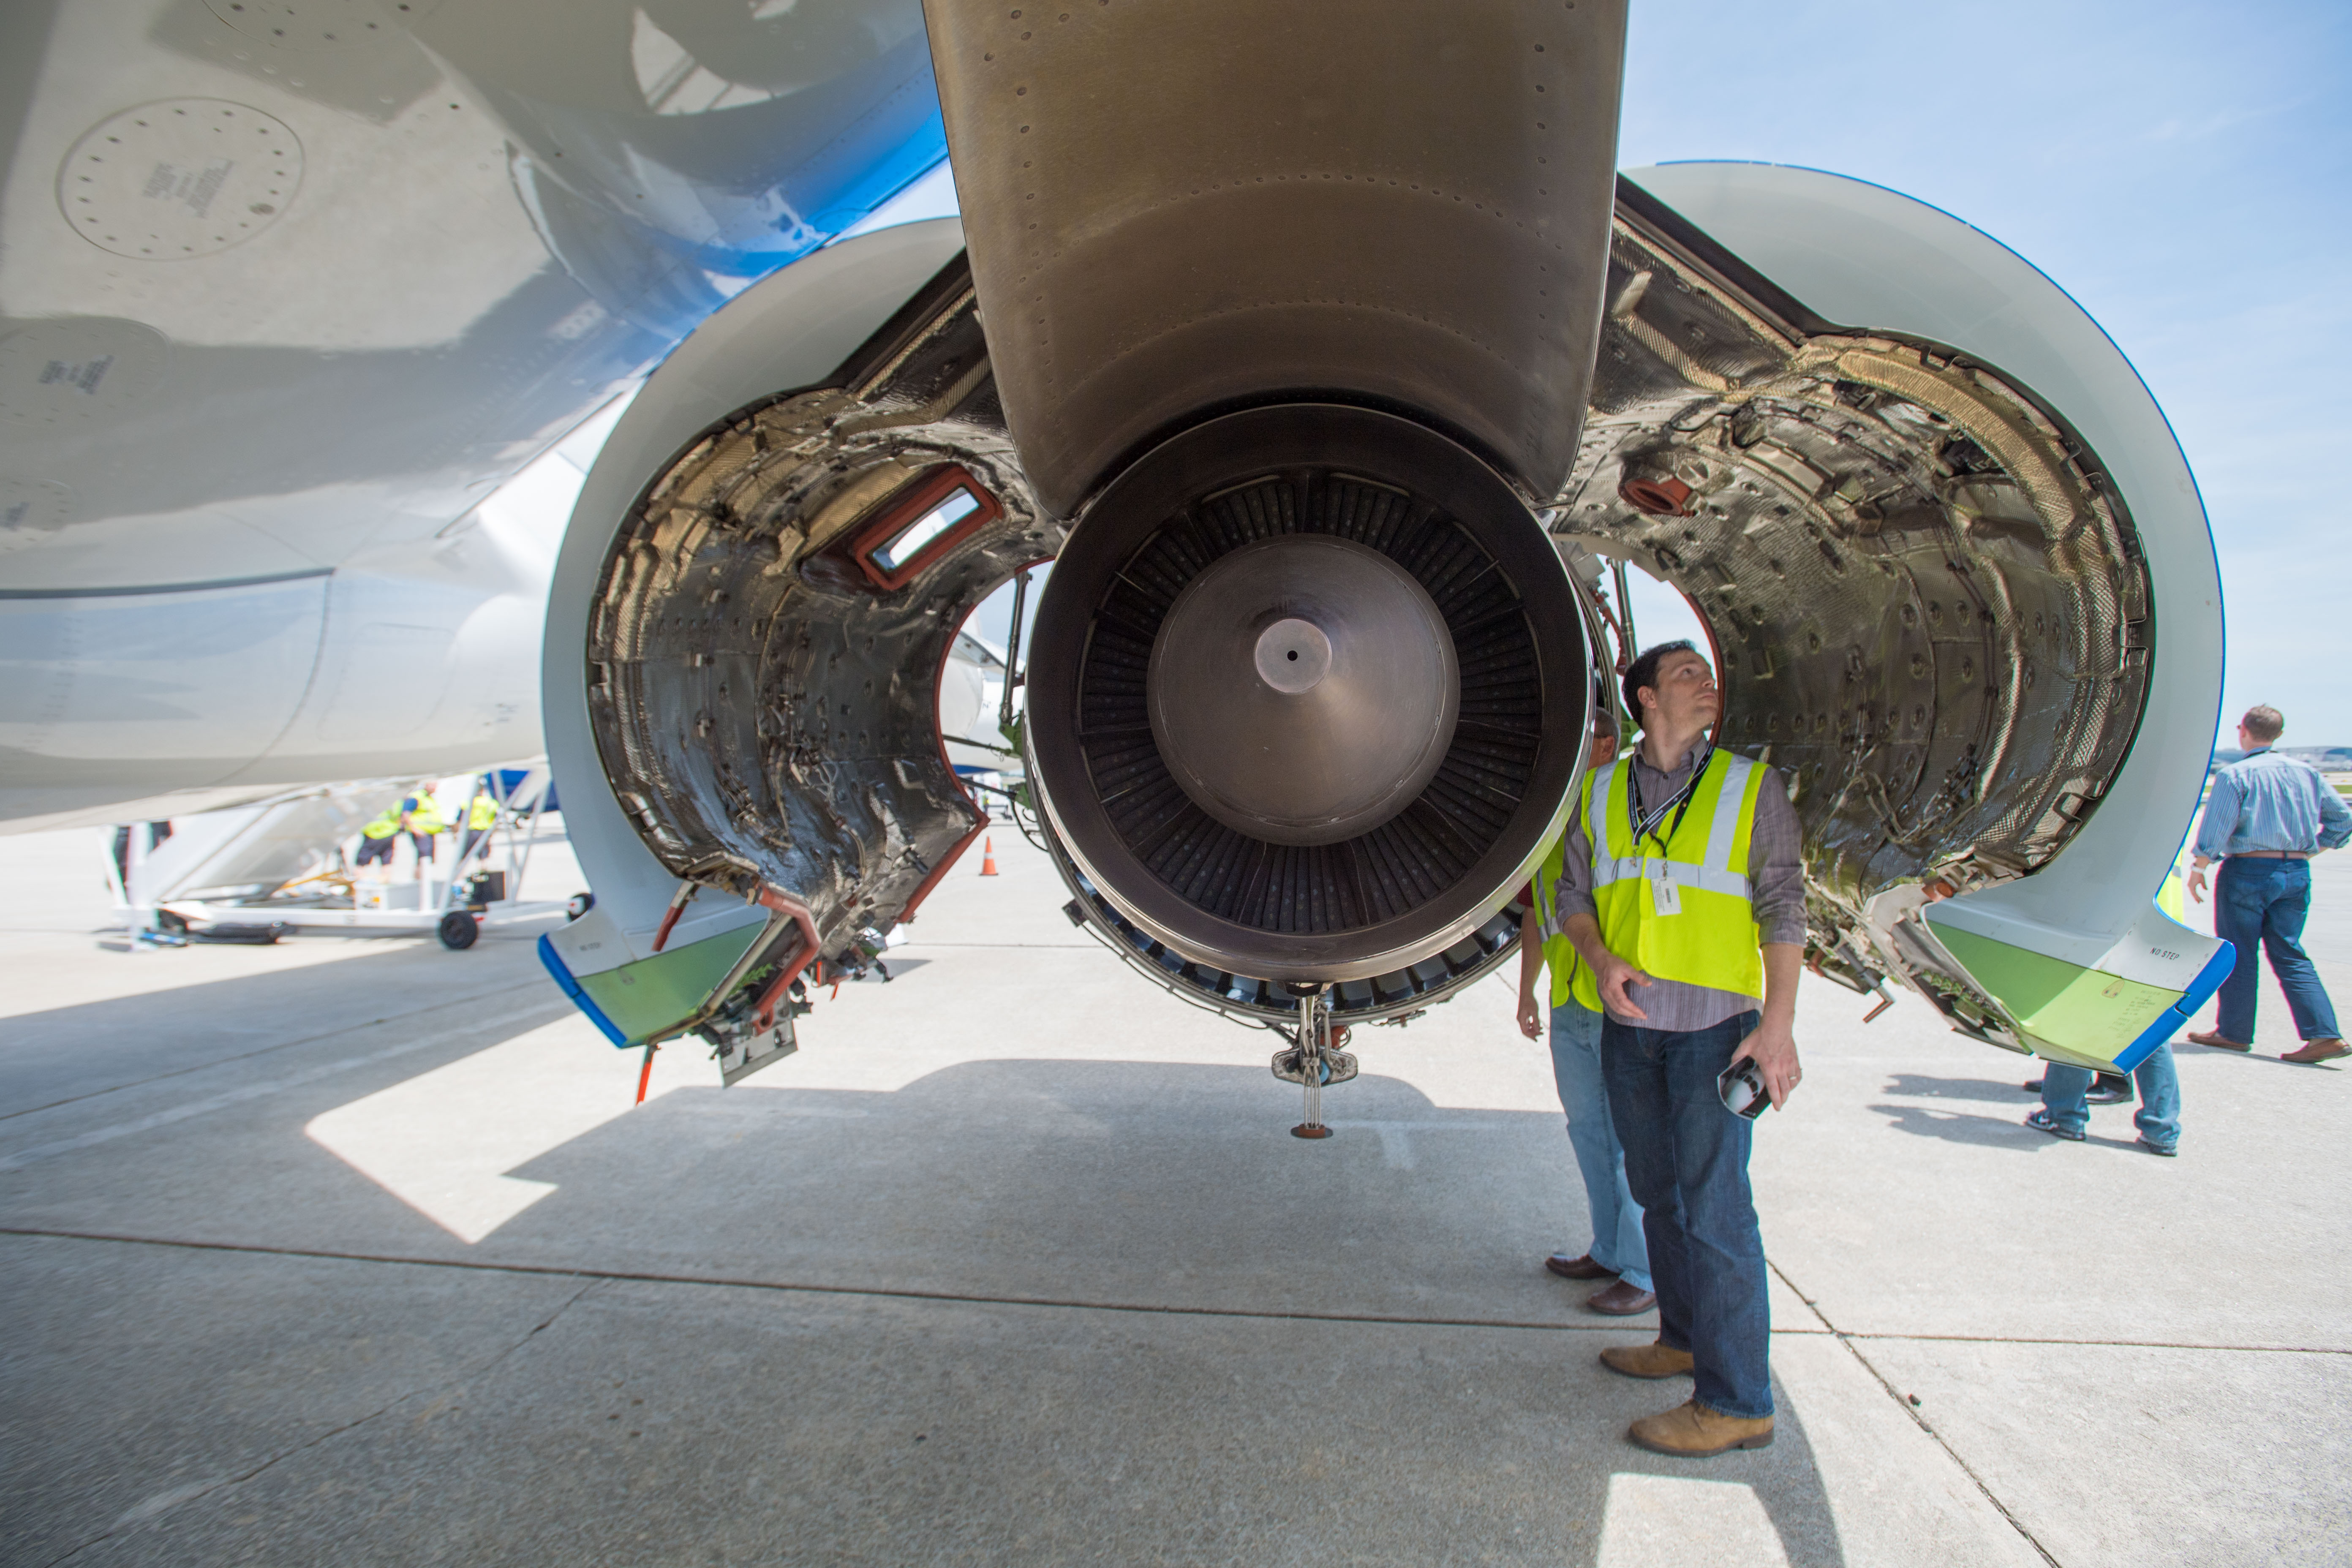 Underneath the wing of an Airbus A220 aircraft with cowlings open and a Pratt & Whitney PW1000G engine displayed